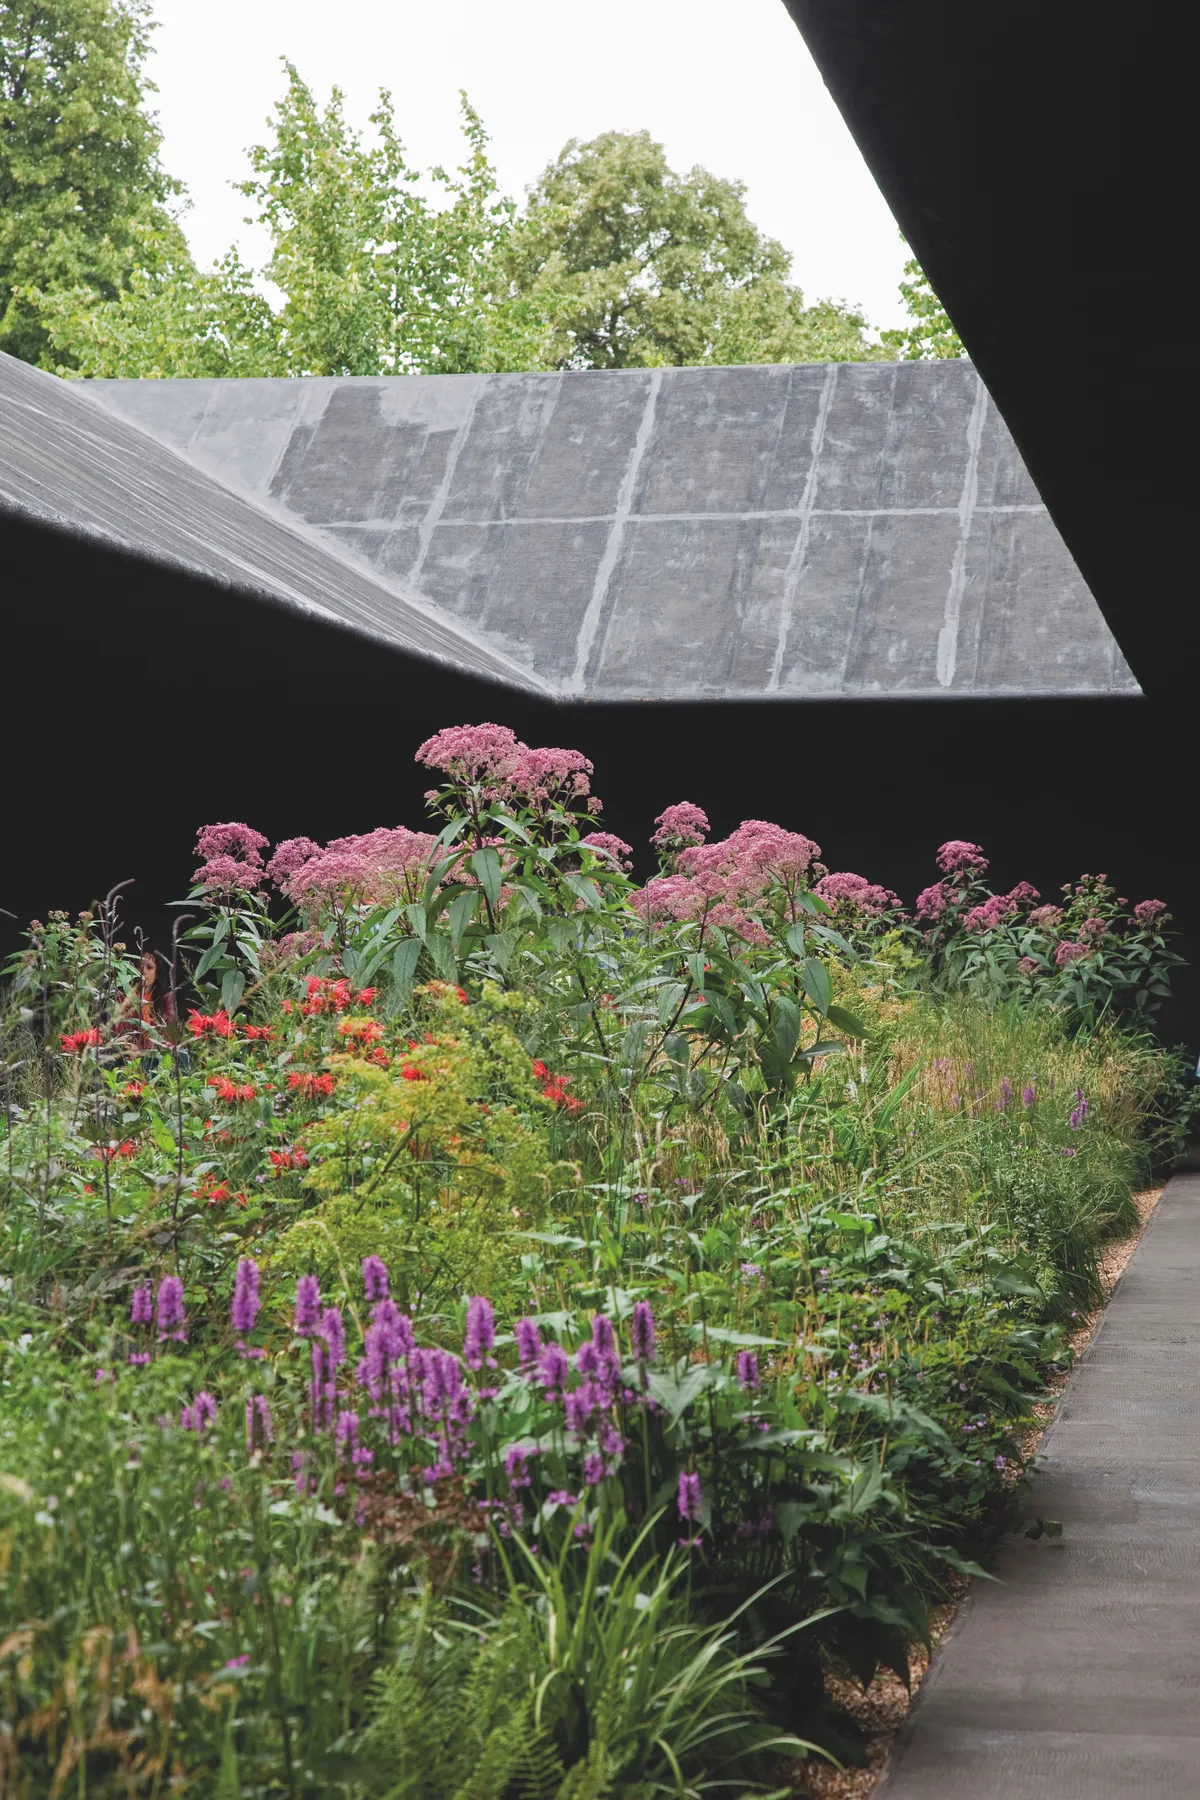 This planting by Piet Oudolf at the 2011 Serpentine Pavilion designed by Peter Zumthor showcases balance between distilled, angular, built forms and beautifully put together. chaotic and colourful nature.